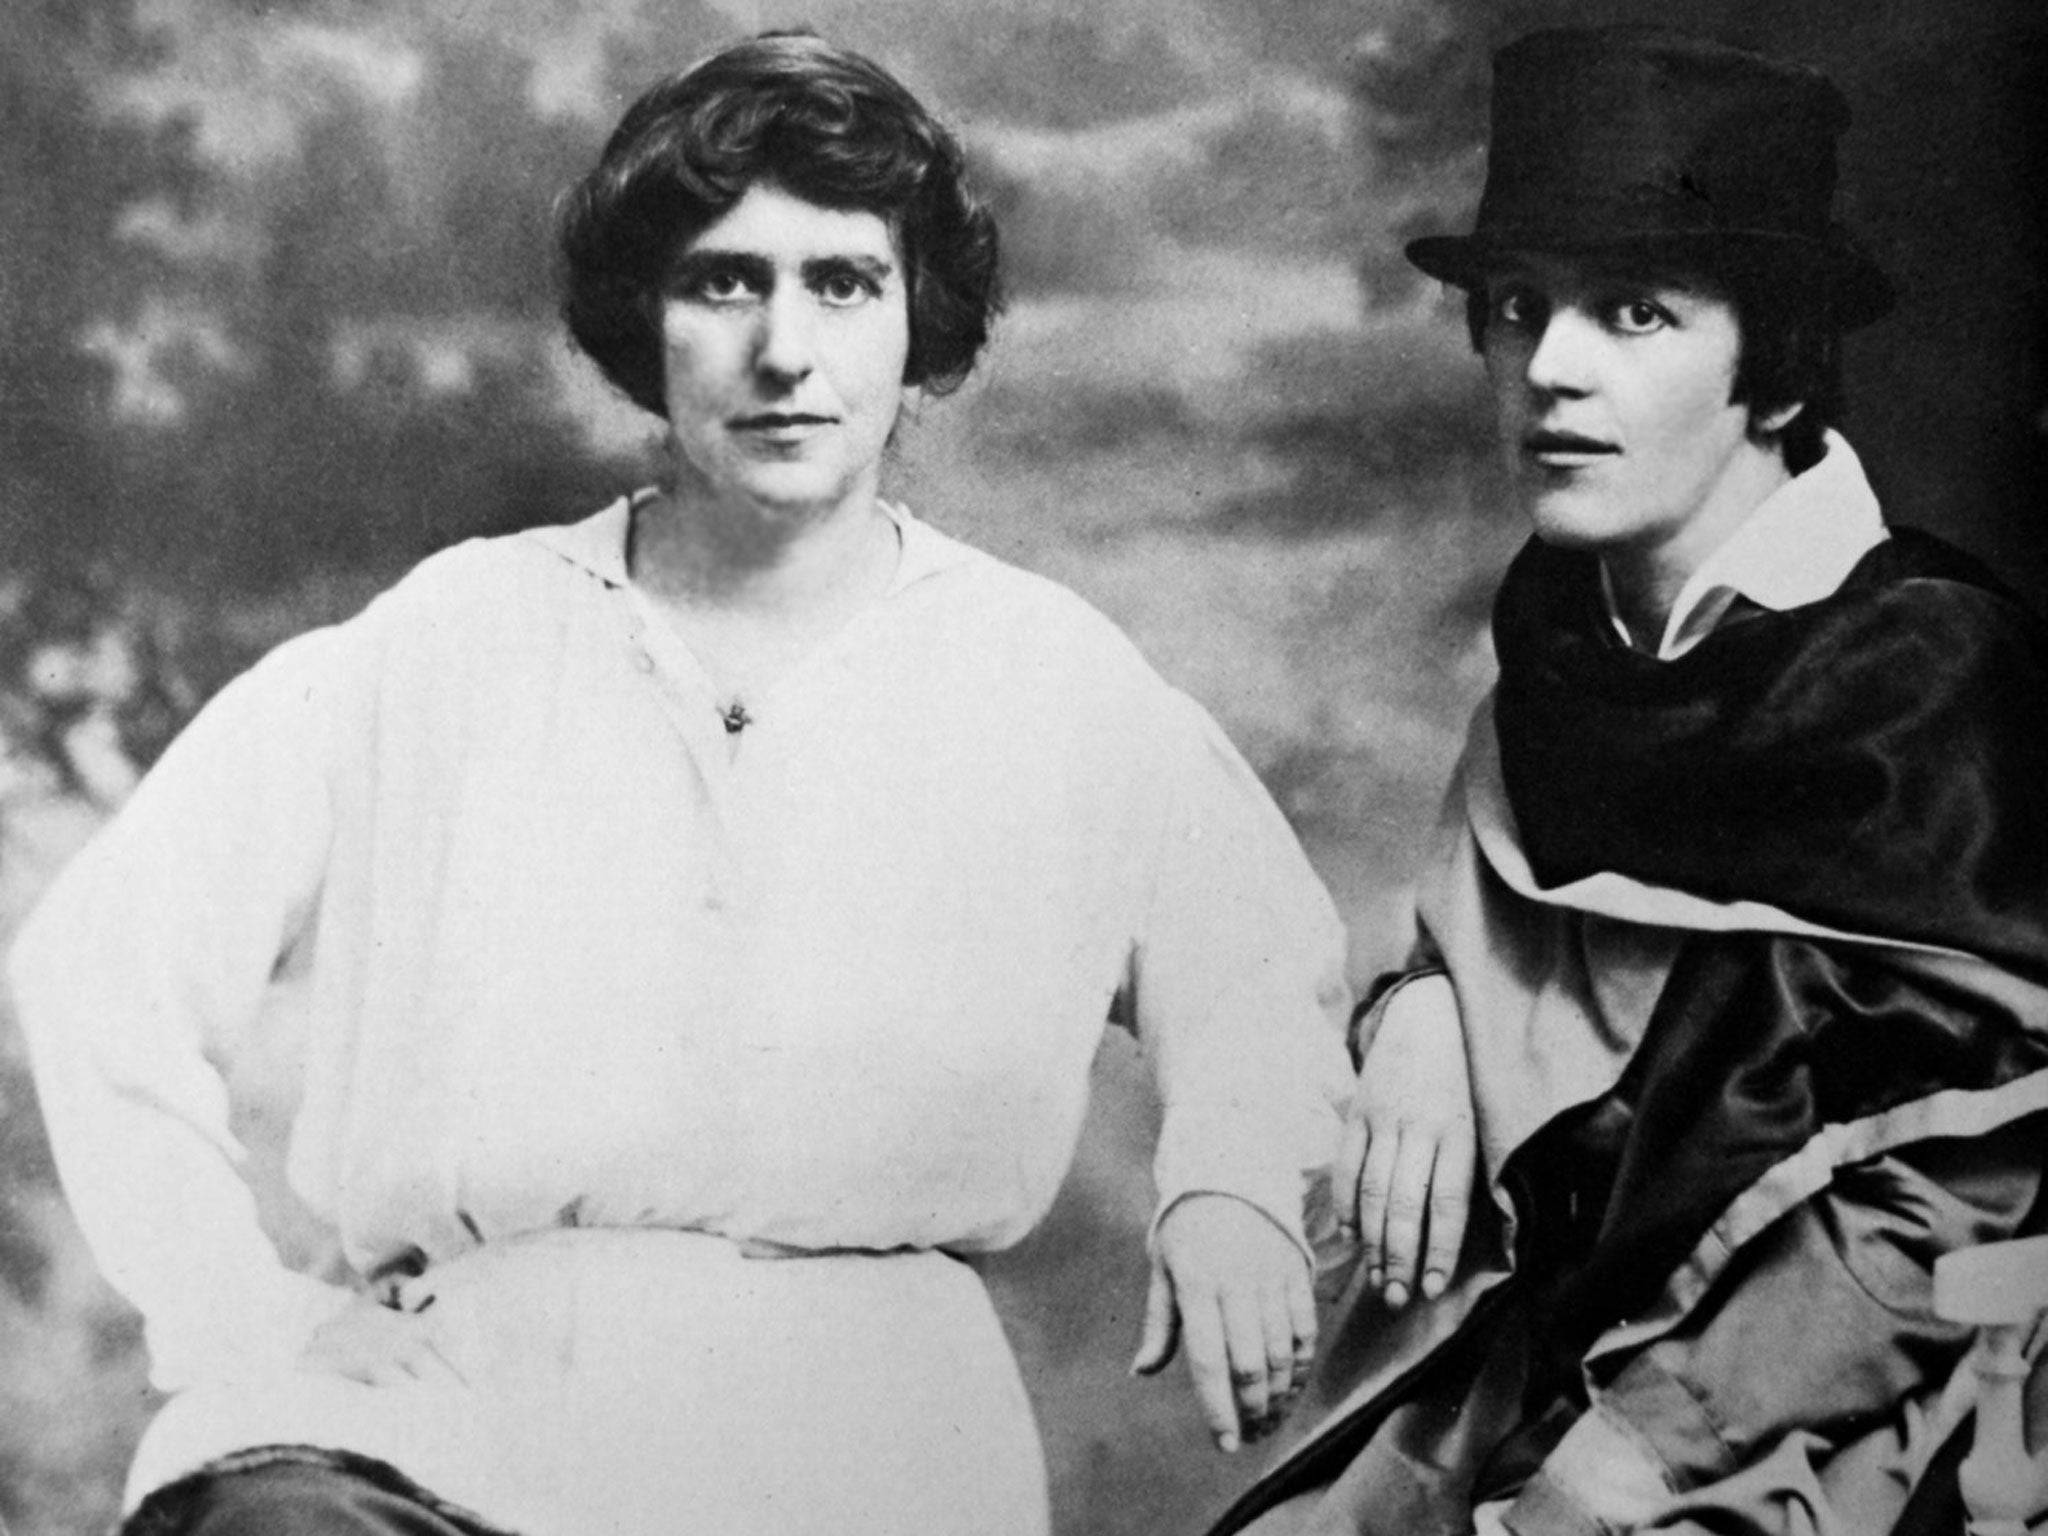 Natalie Barney, left, and Romaine Brooks, both notorious lesbians, were lovers for 50 years. Collection Jean Chalon